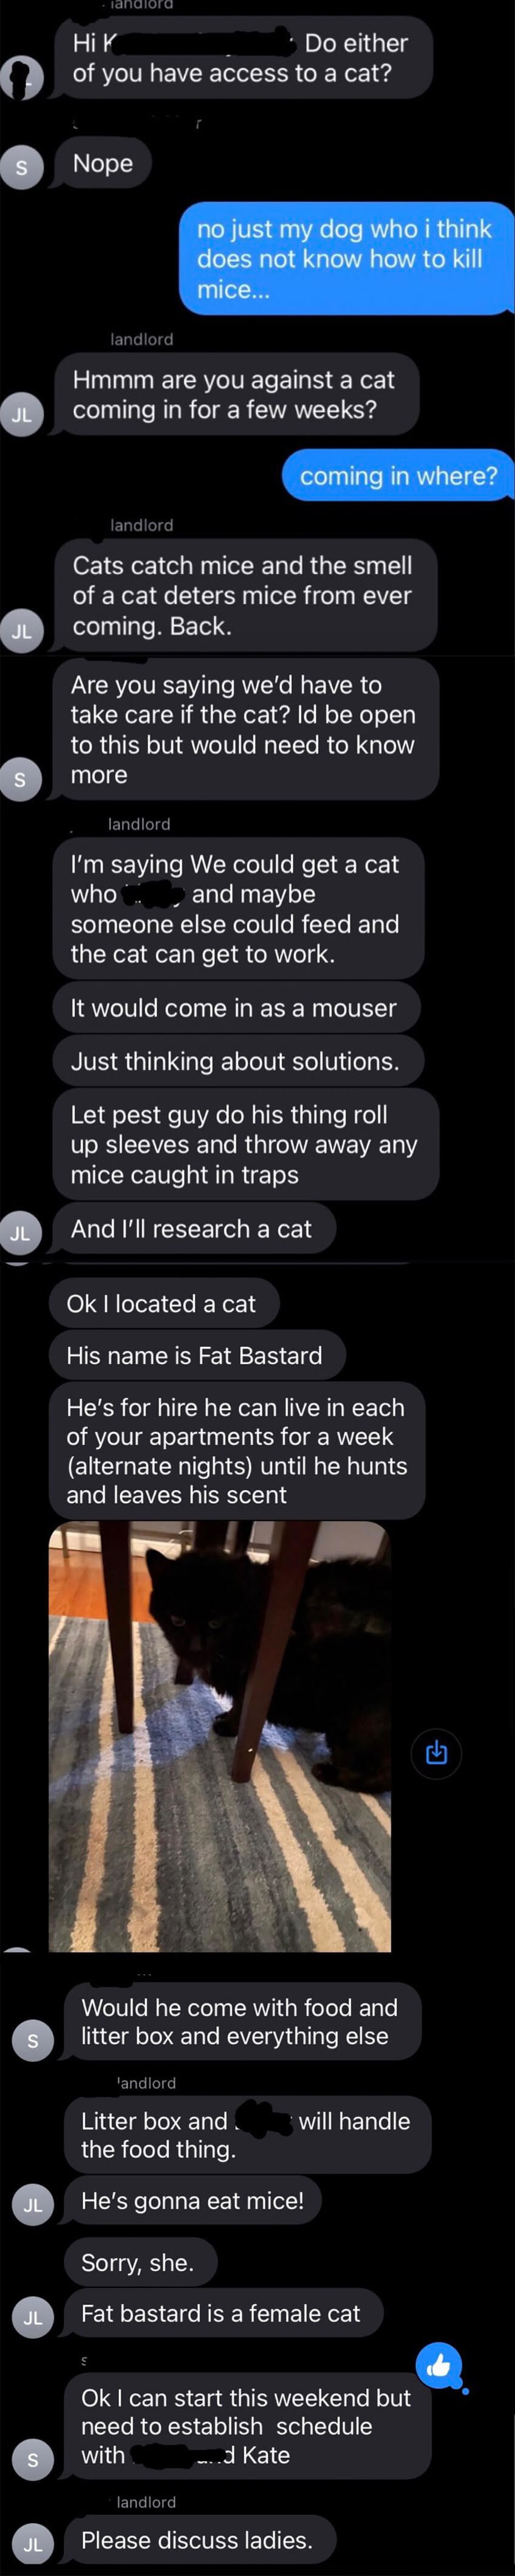 A long text chain with friends discussing getting a shared cat named Fat Bastard in order to solve a mouse problem